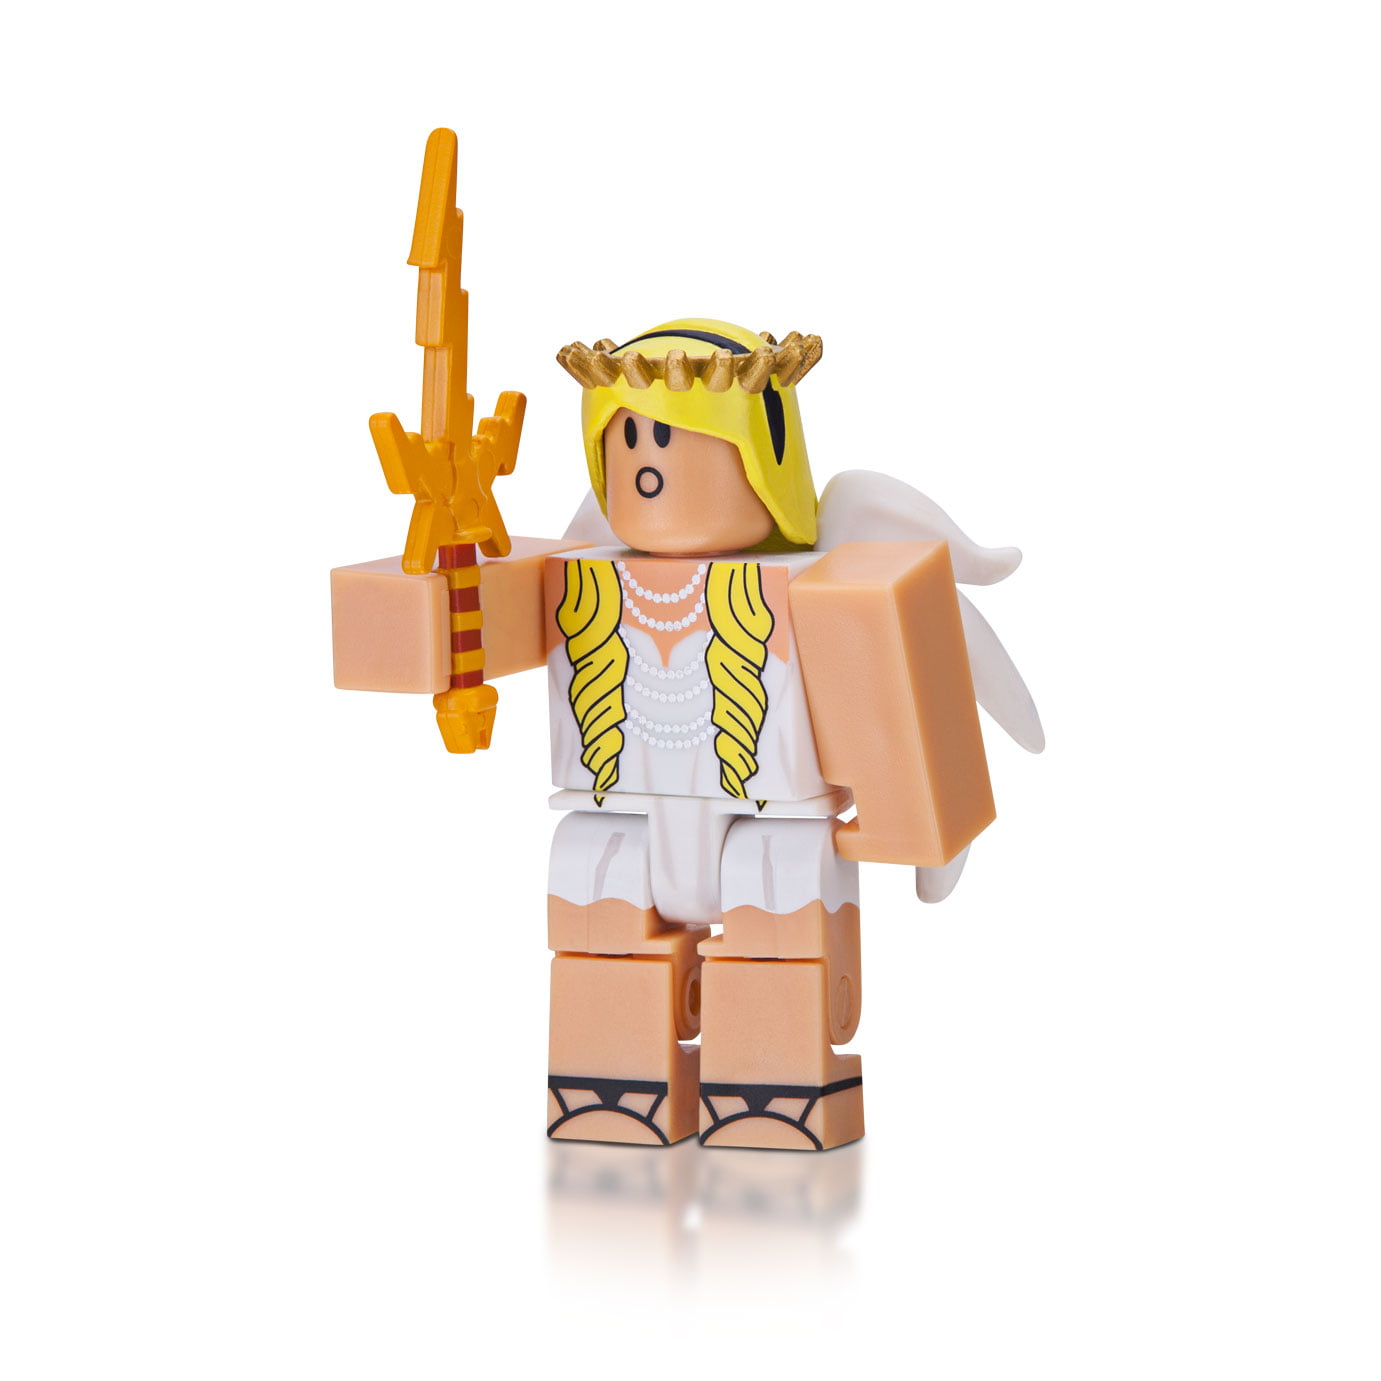 Roblox Celebrity Collection Series 2 Mystery Figure Includes 1 Figure Exclusive Virtual Item Walmart Com Walmart Com - roblox celebrity collection fashion famous playset includes exclusive virtual item walmart com walmart com